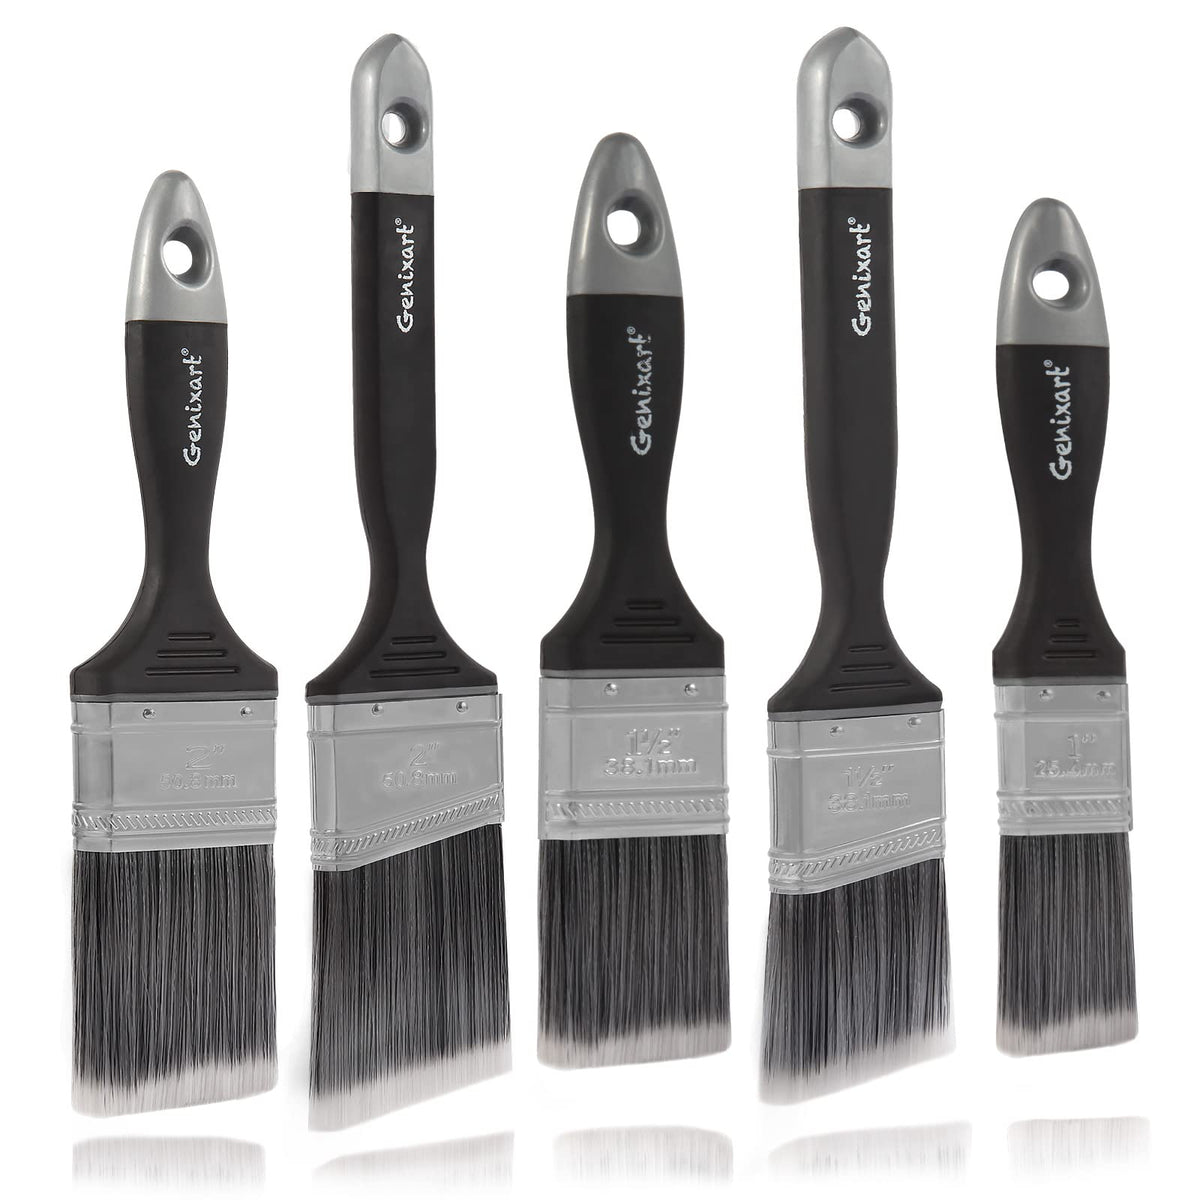 Magimate Small Paint Brush for Touch Ups, Trim Stain Brush for Sash,  Baseboards, House Wall Corners